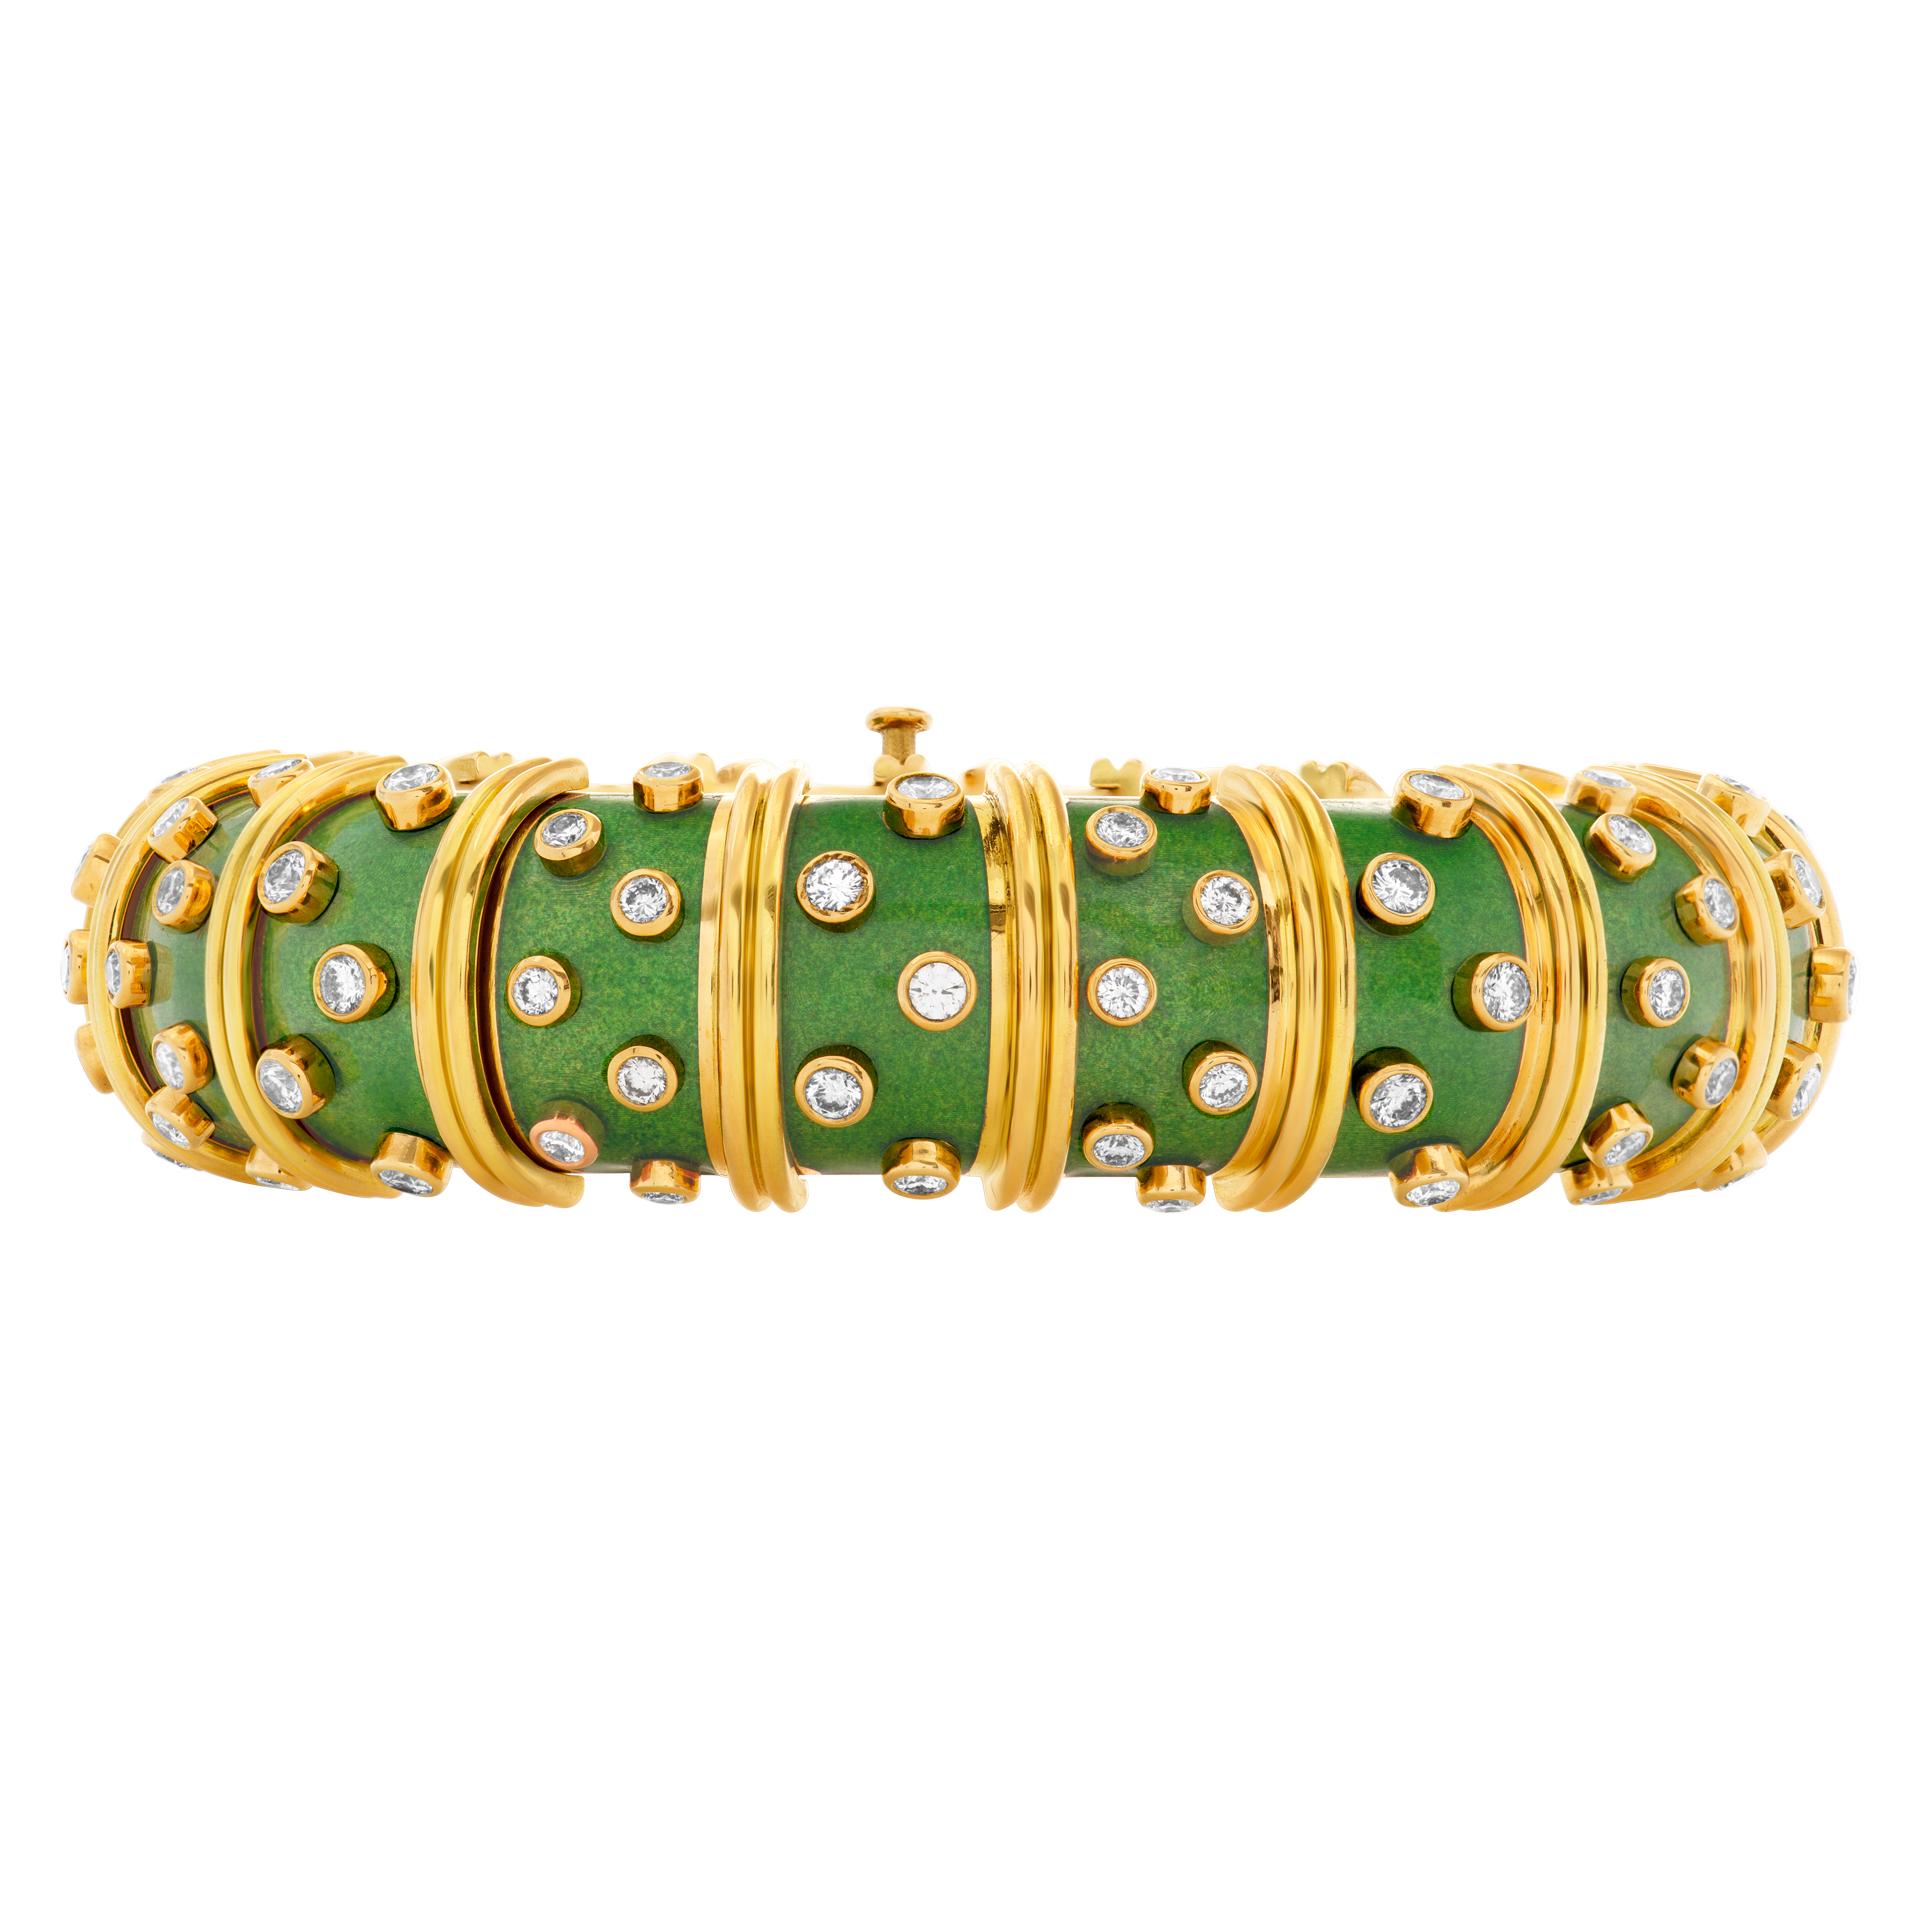 Iconic Tiffany & Co. Schlumberger articulated link bombe bangle in 18k yellow gold with applied green lacquered enamel with alternately spaced ribbed gold stations, studded with approximately 6 carats in bezel-set round brilliant-cut gem-quality